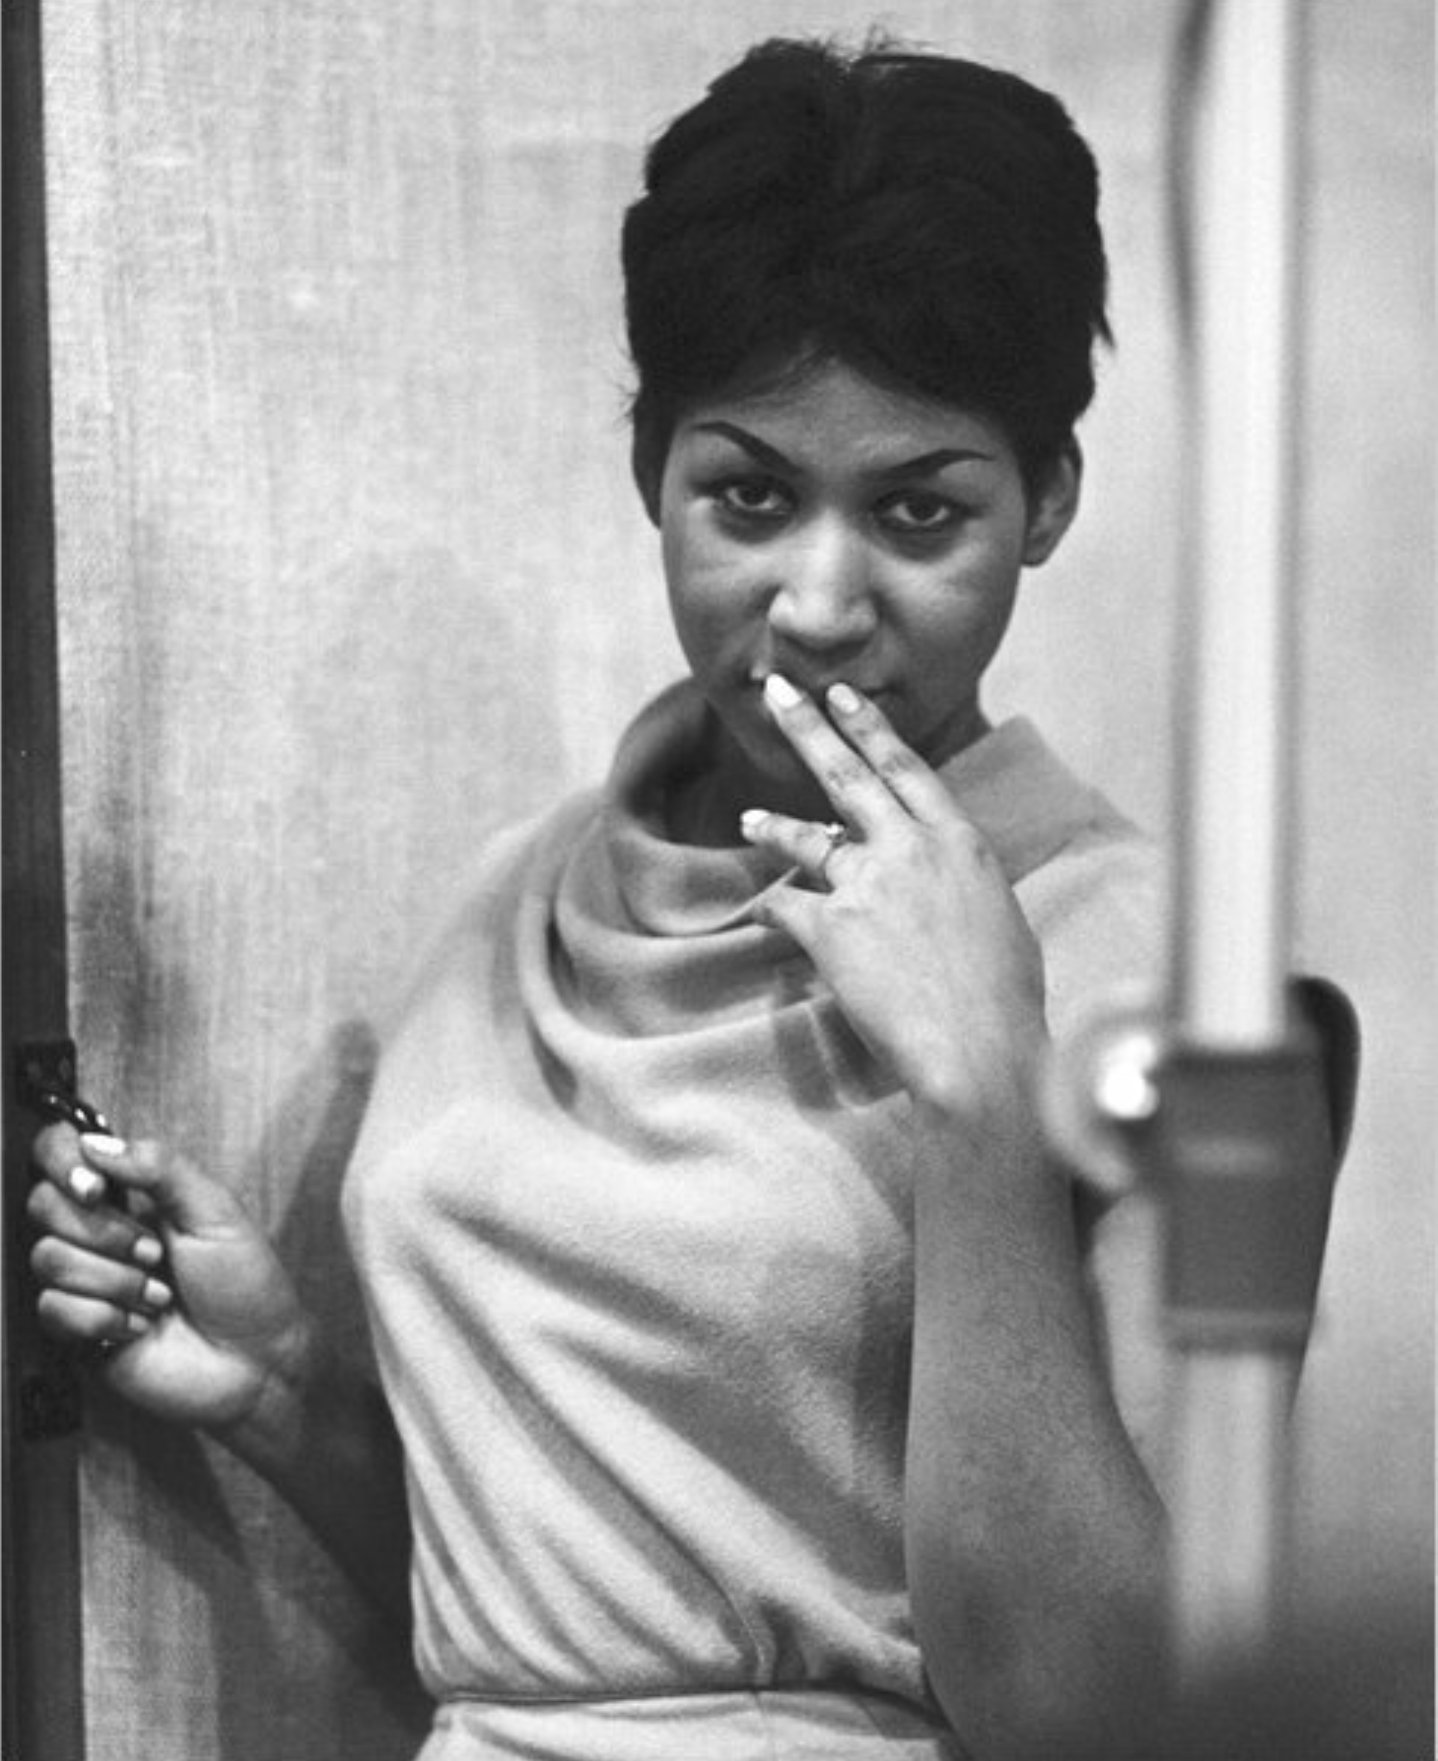 Happy Birthday, Aretha Franklin  Chain of Fools - 1967
Songwriter: Don Covay

 